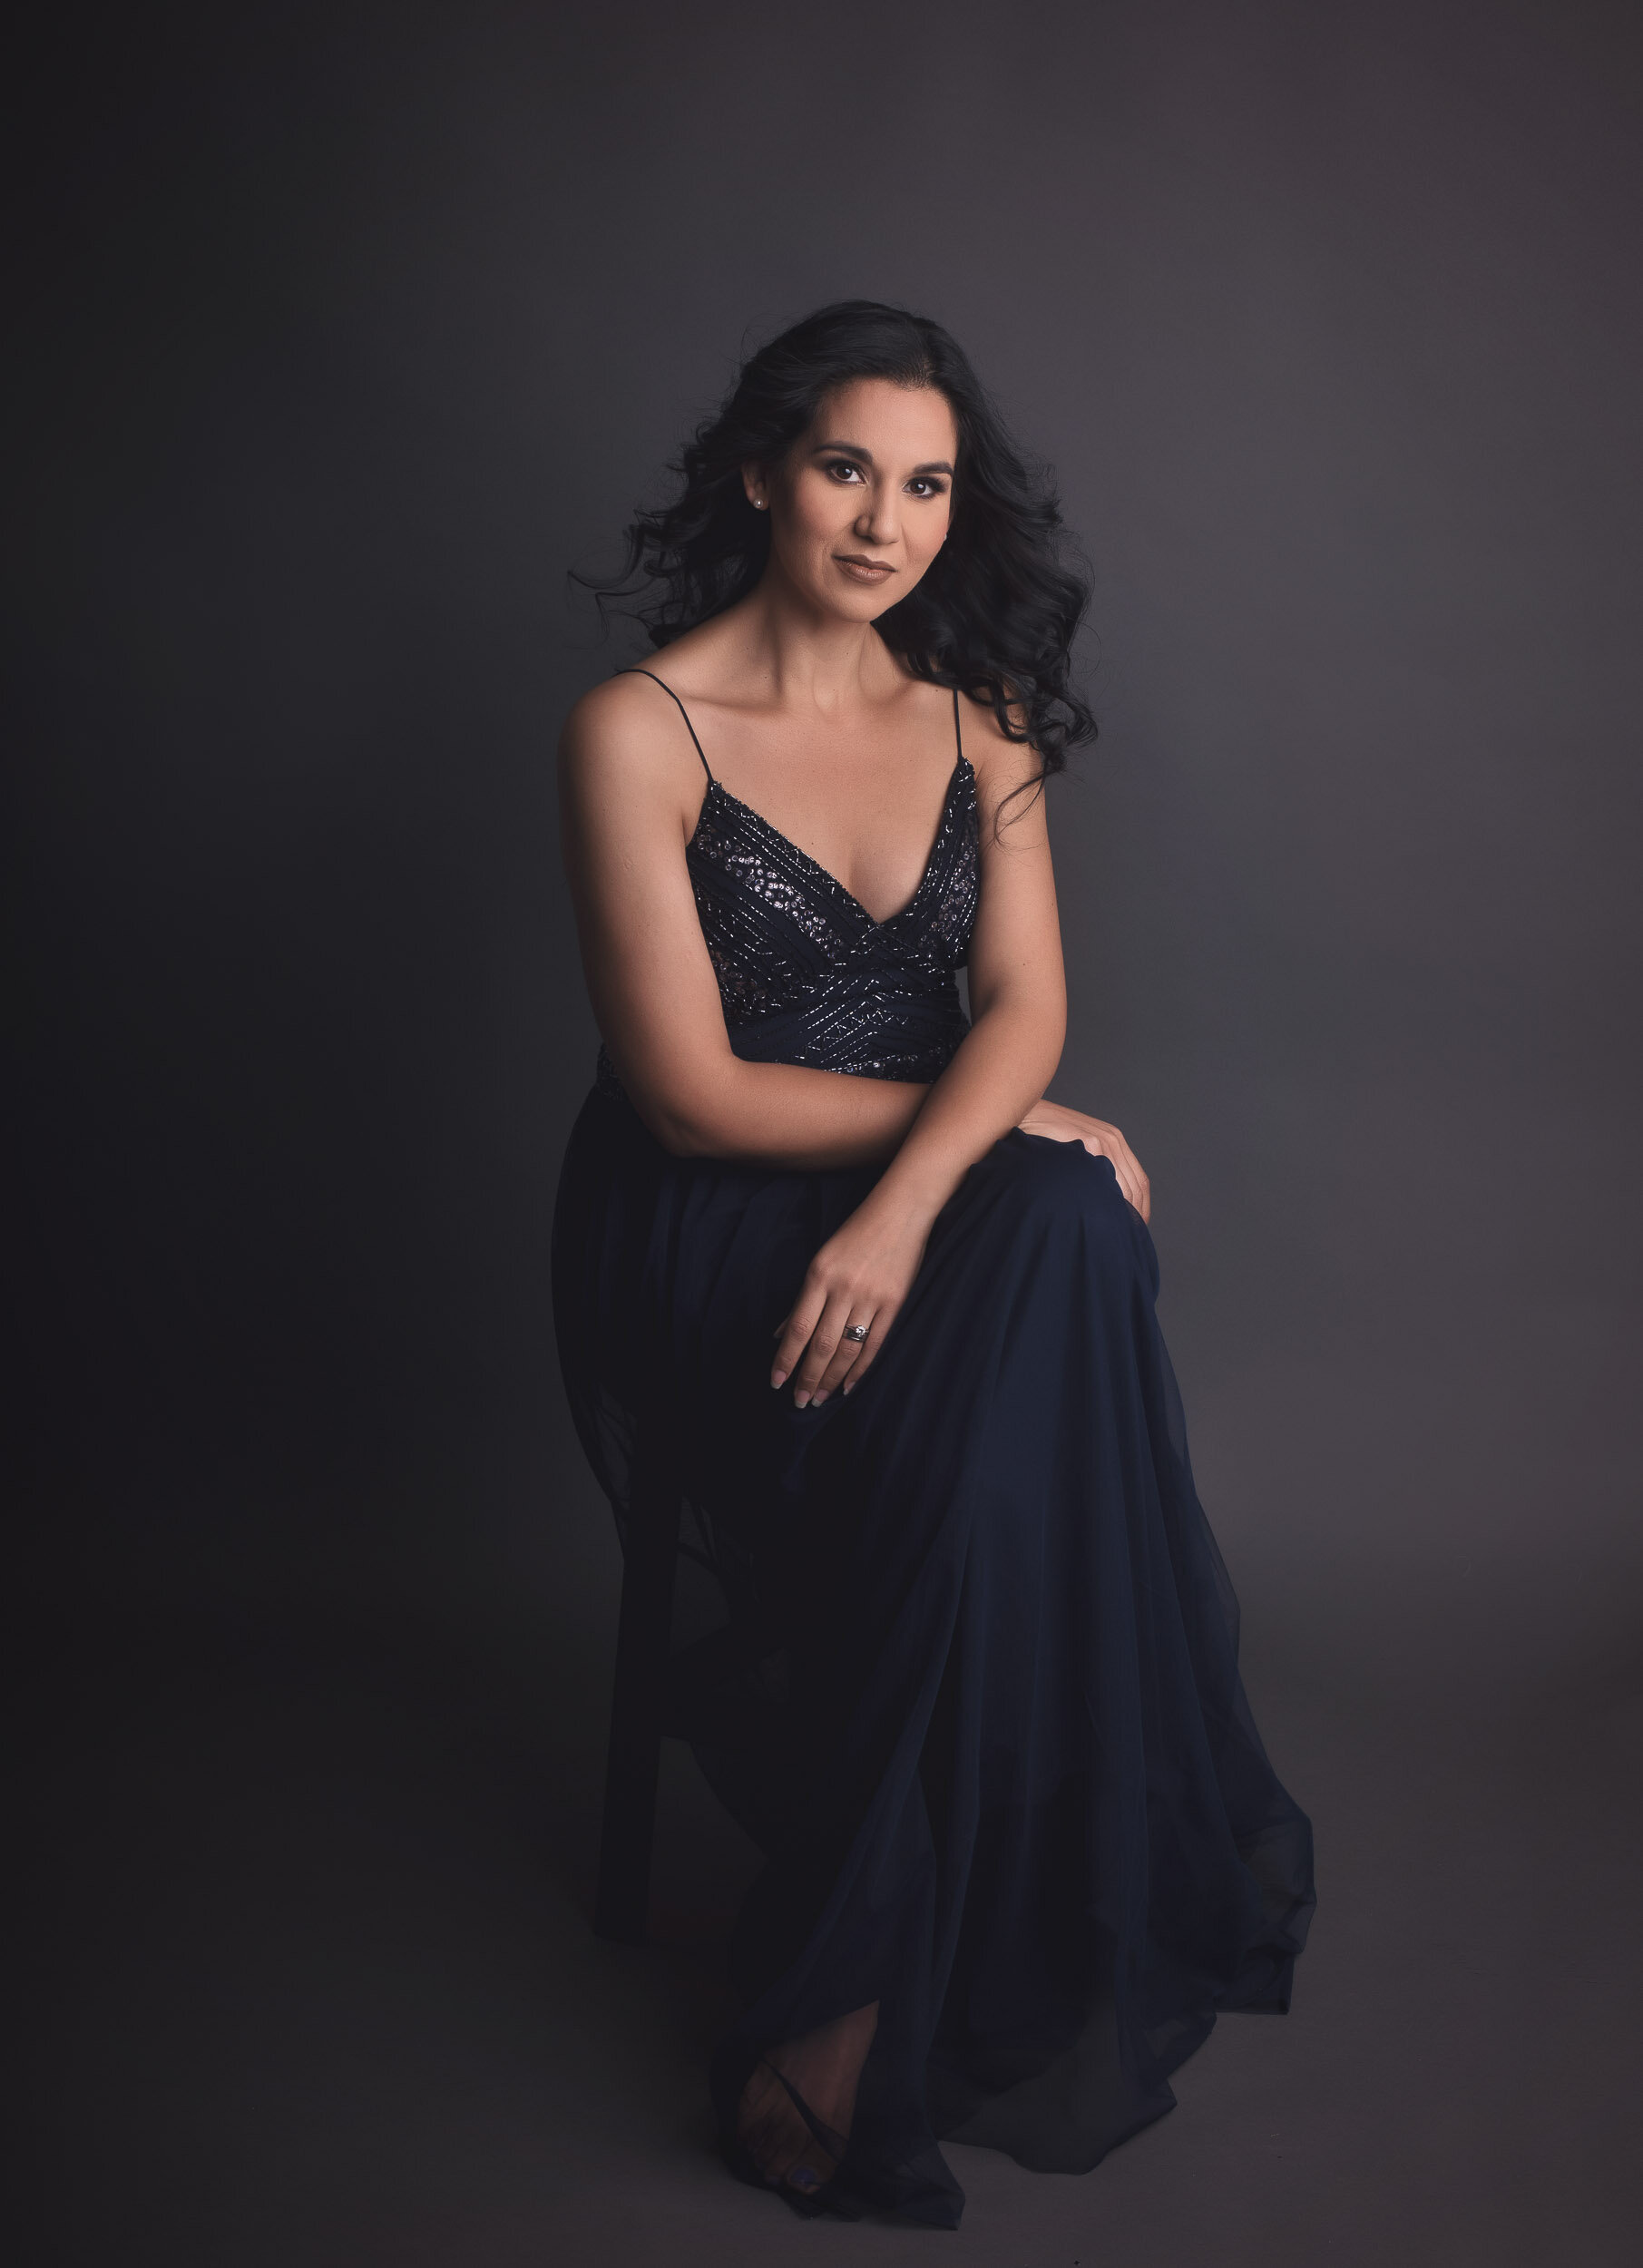 beautiful glamour portrait pose in gorgeous navy blue gown shot at Ana Lanier Portrait Studio in Dallas, TX